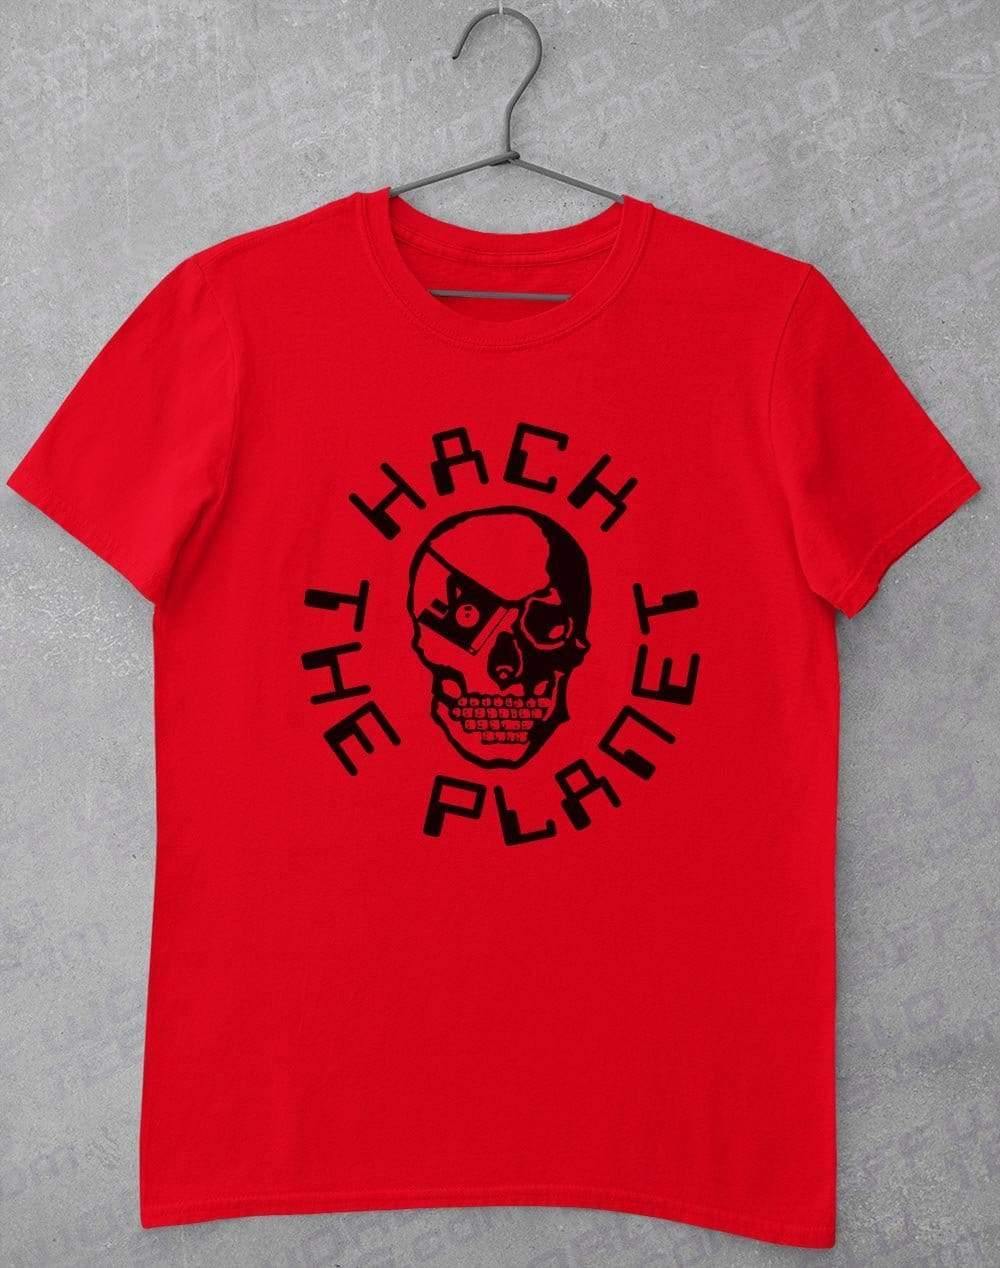 Hack the Planet T-Shirt S / Red  - Off World Tees